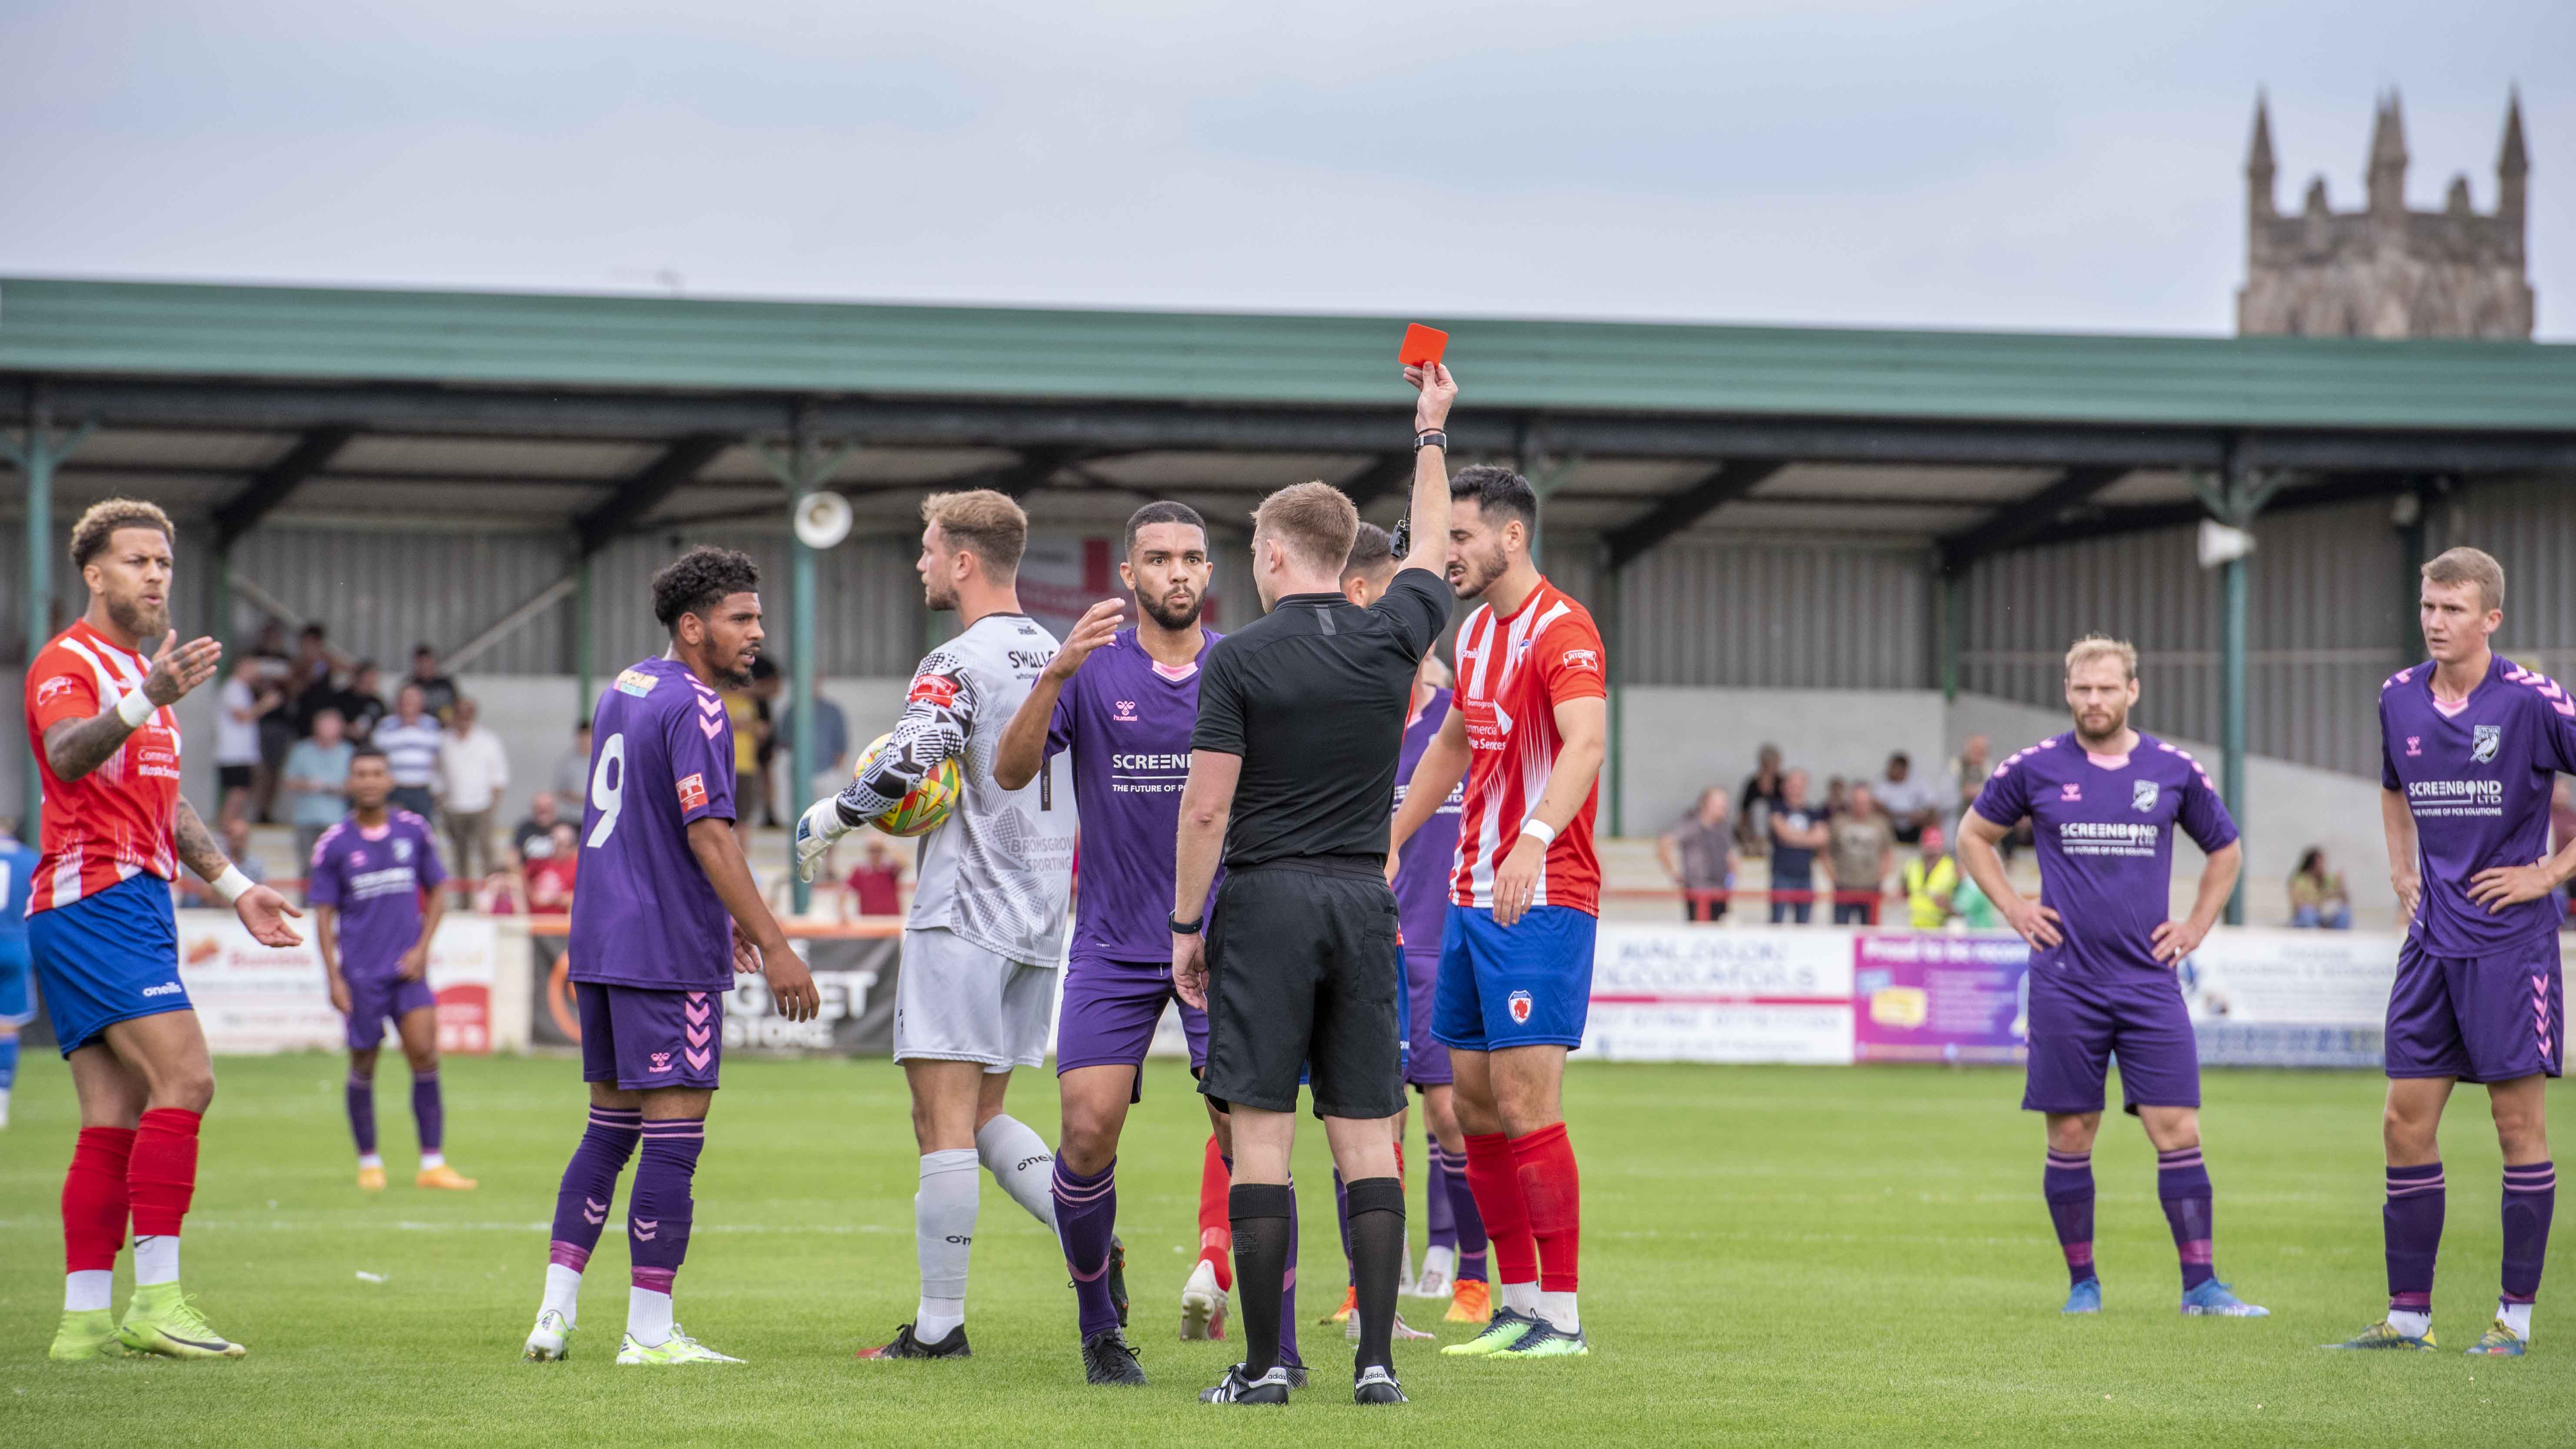 Bromsgrove Sporting 2-1 Hitchin Town. PICTURE: A pivotal moment as Lewis Barker is sent off early on. CREDIT: Peter Else 